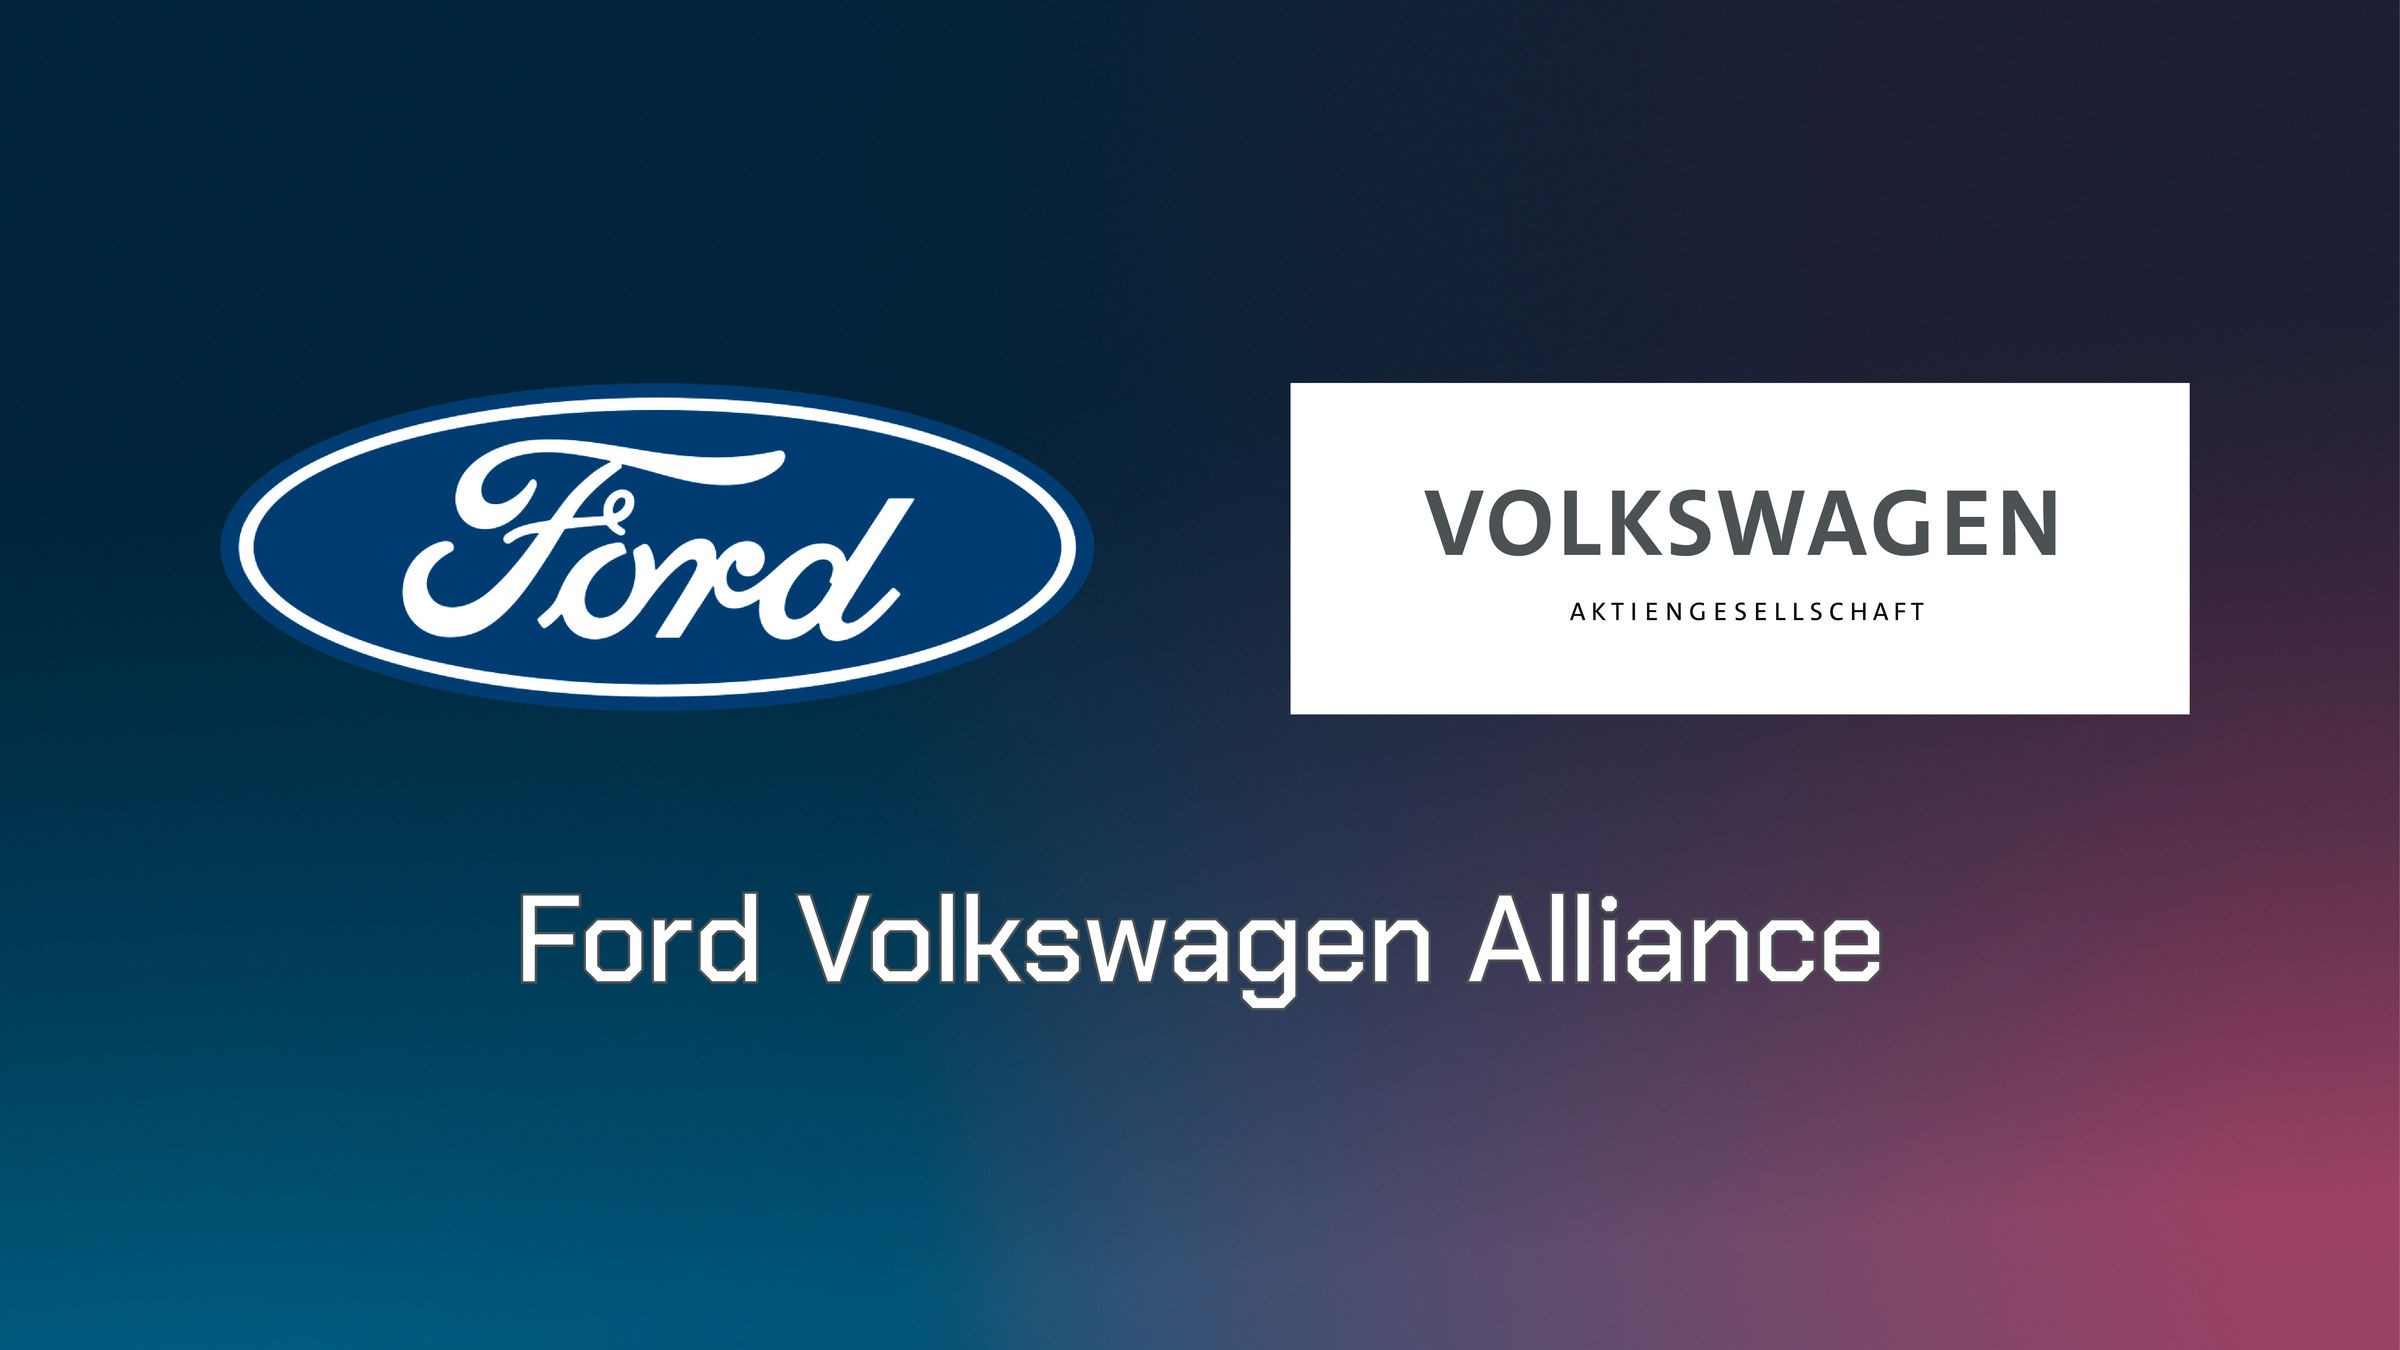 Volkswagen and Ford expand collaboration on MEB electric platform